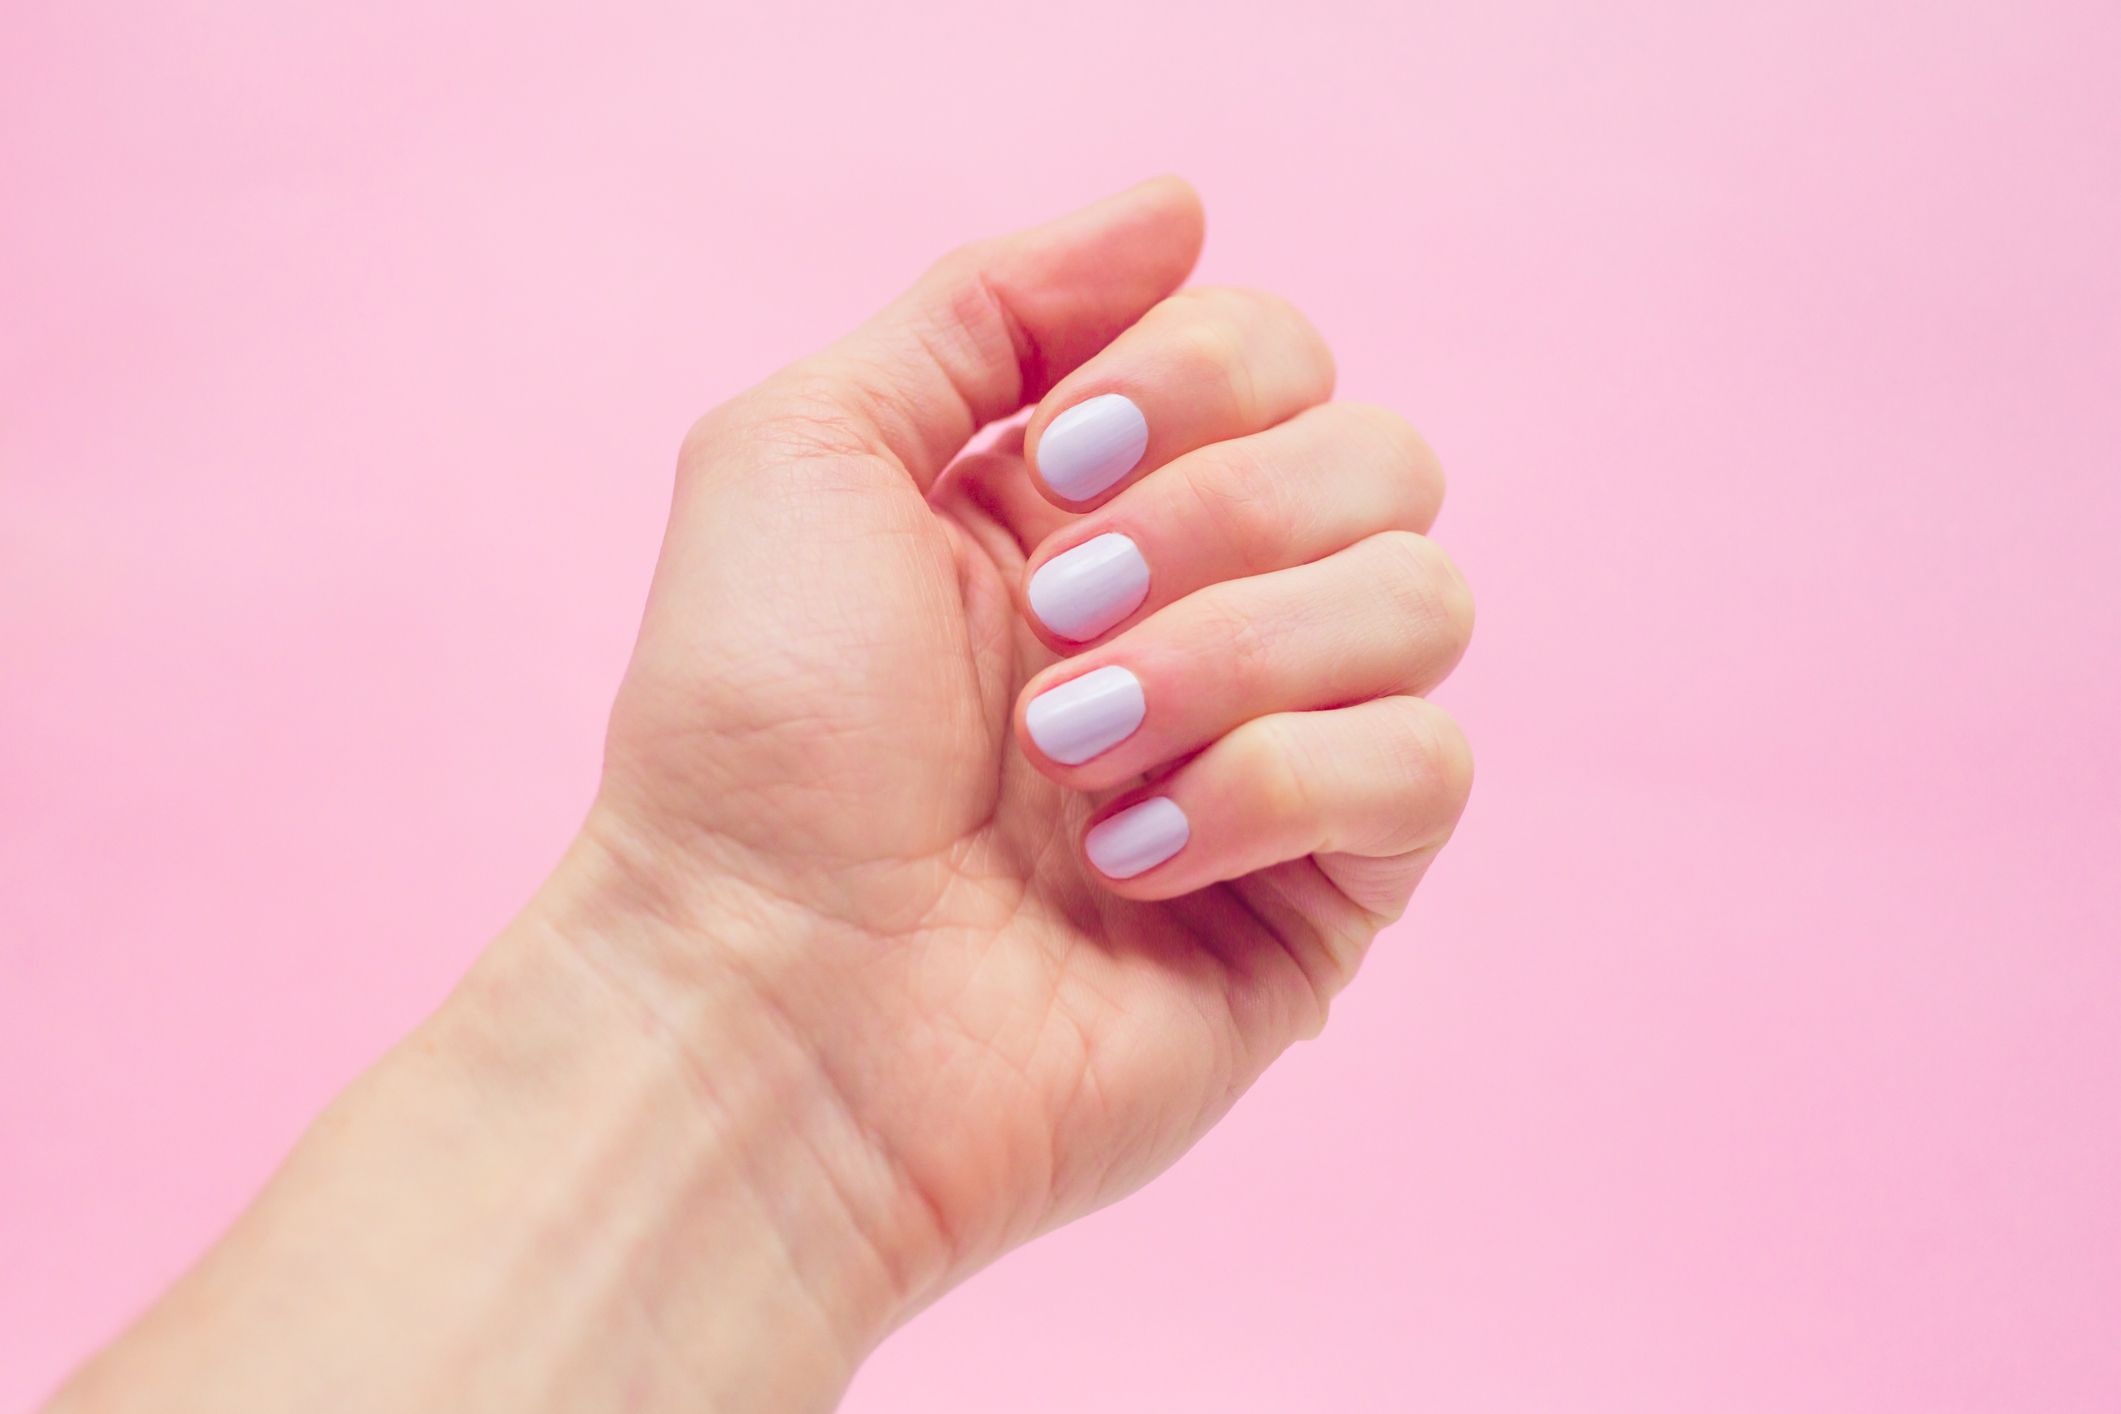 Dip Powder Manicures VS Gel Nail Polish – Which Is Better?